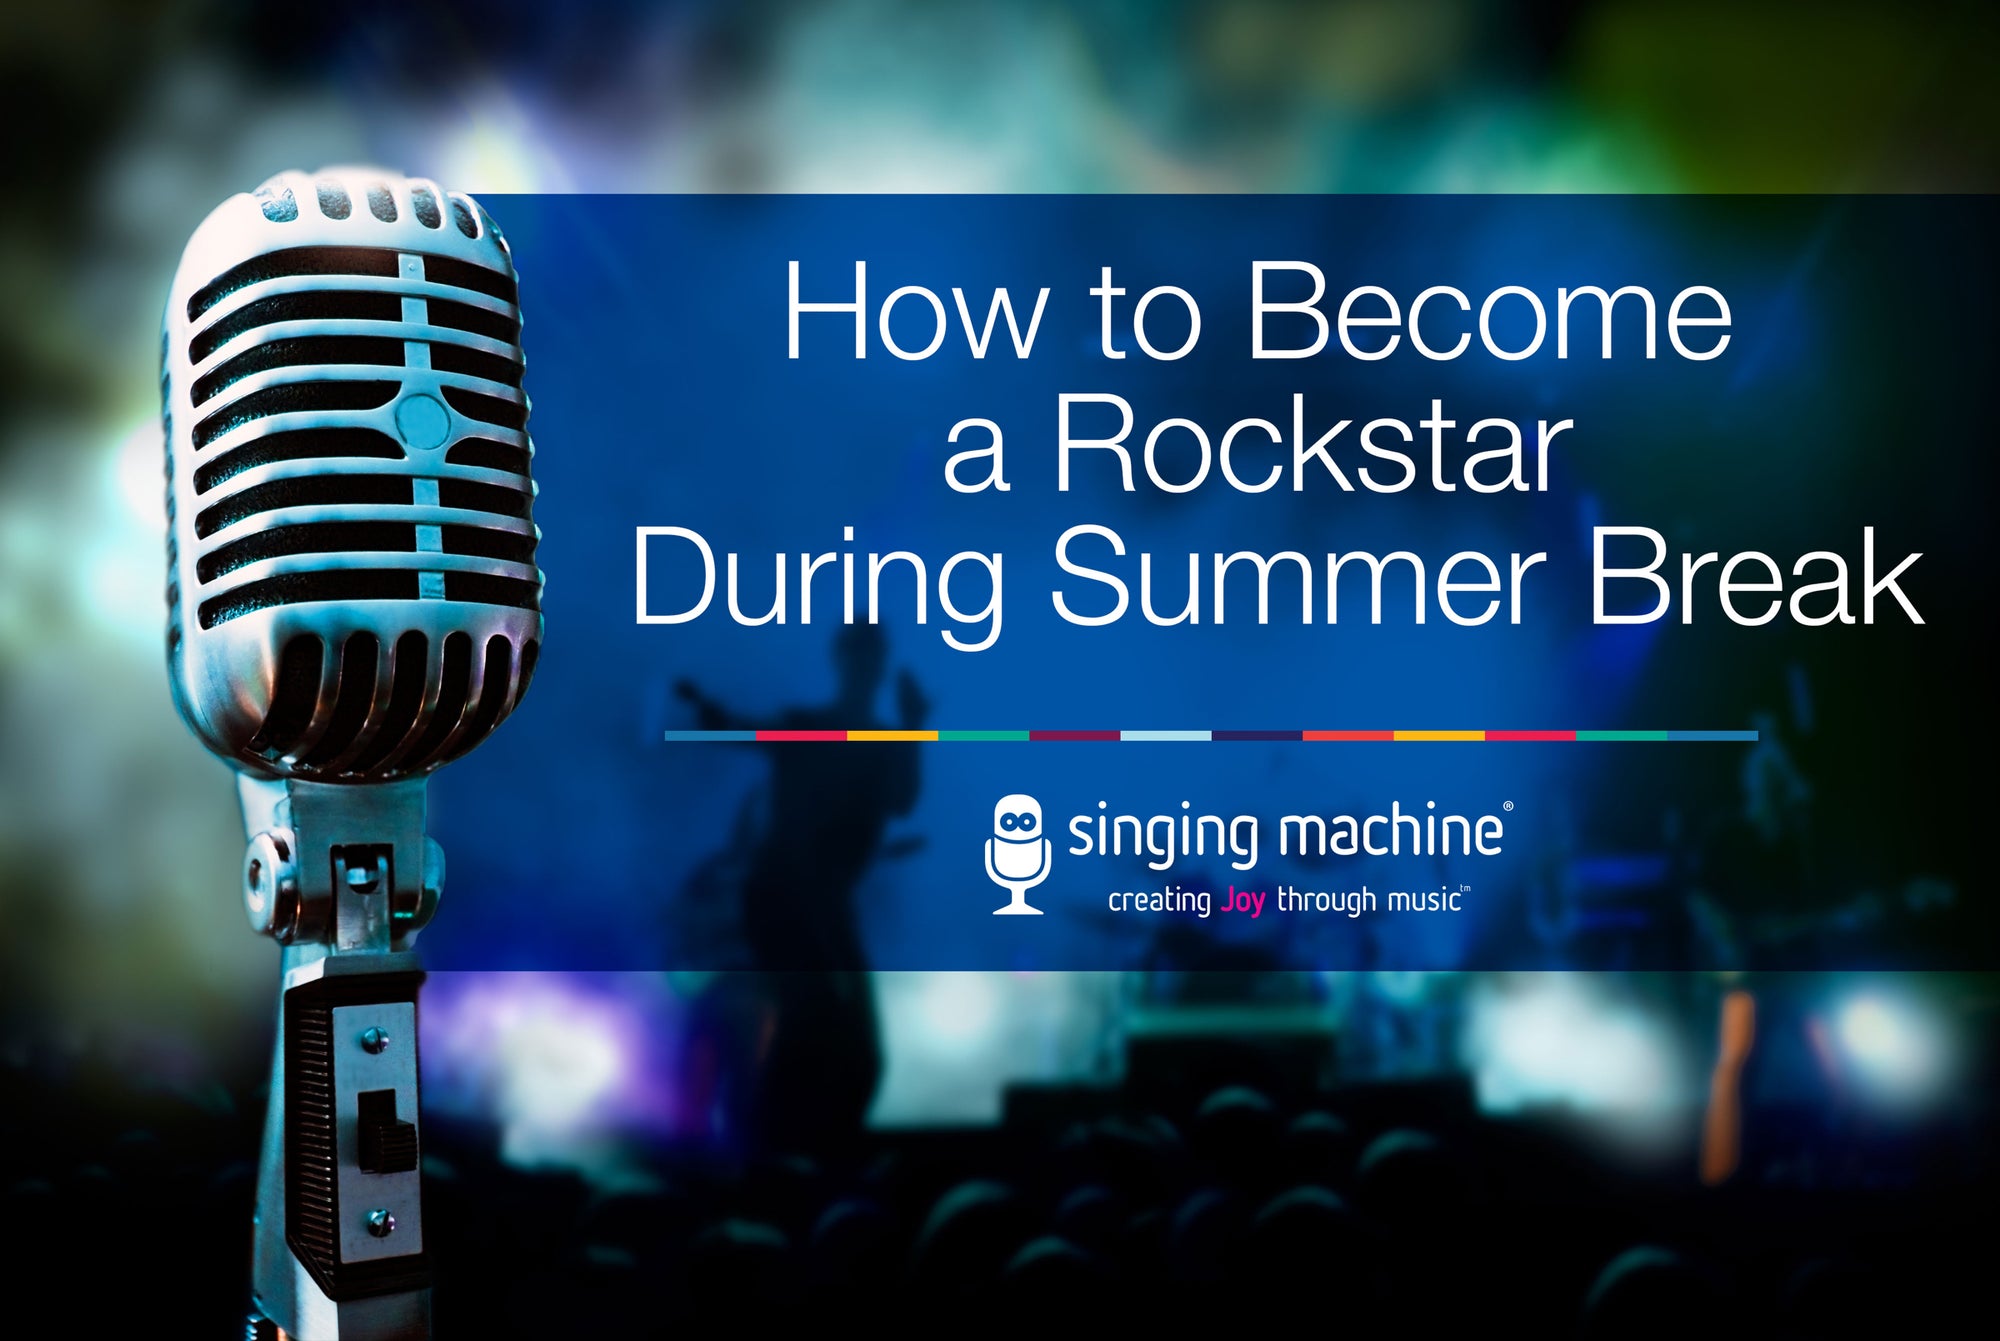 How to Become a Rockstar During Summer Break